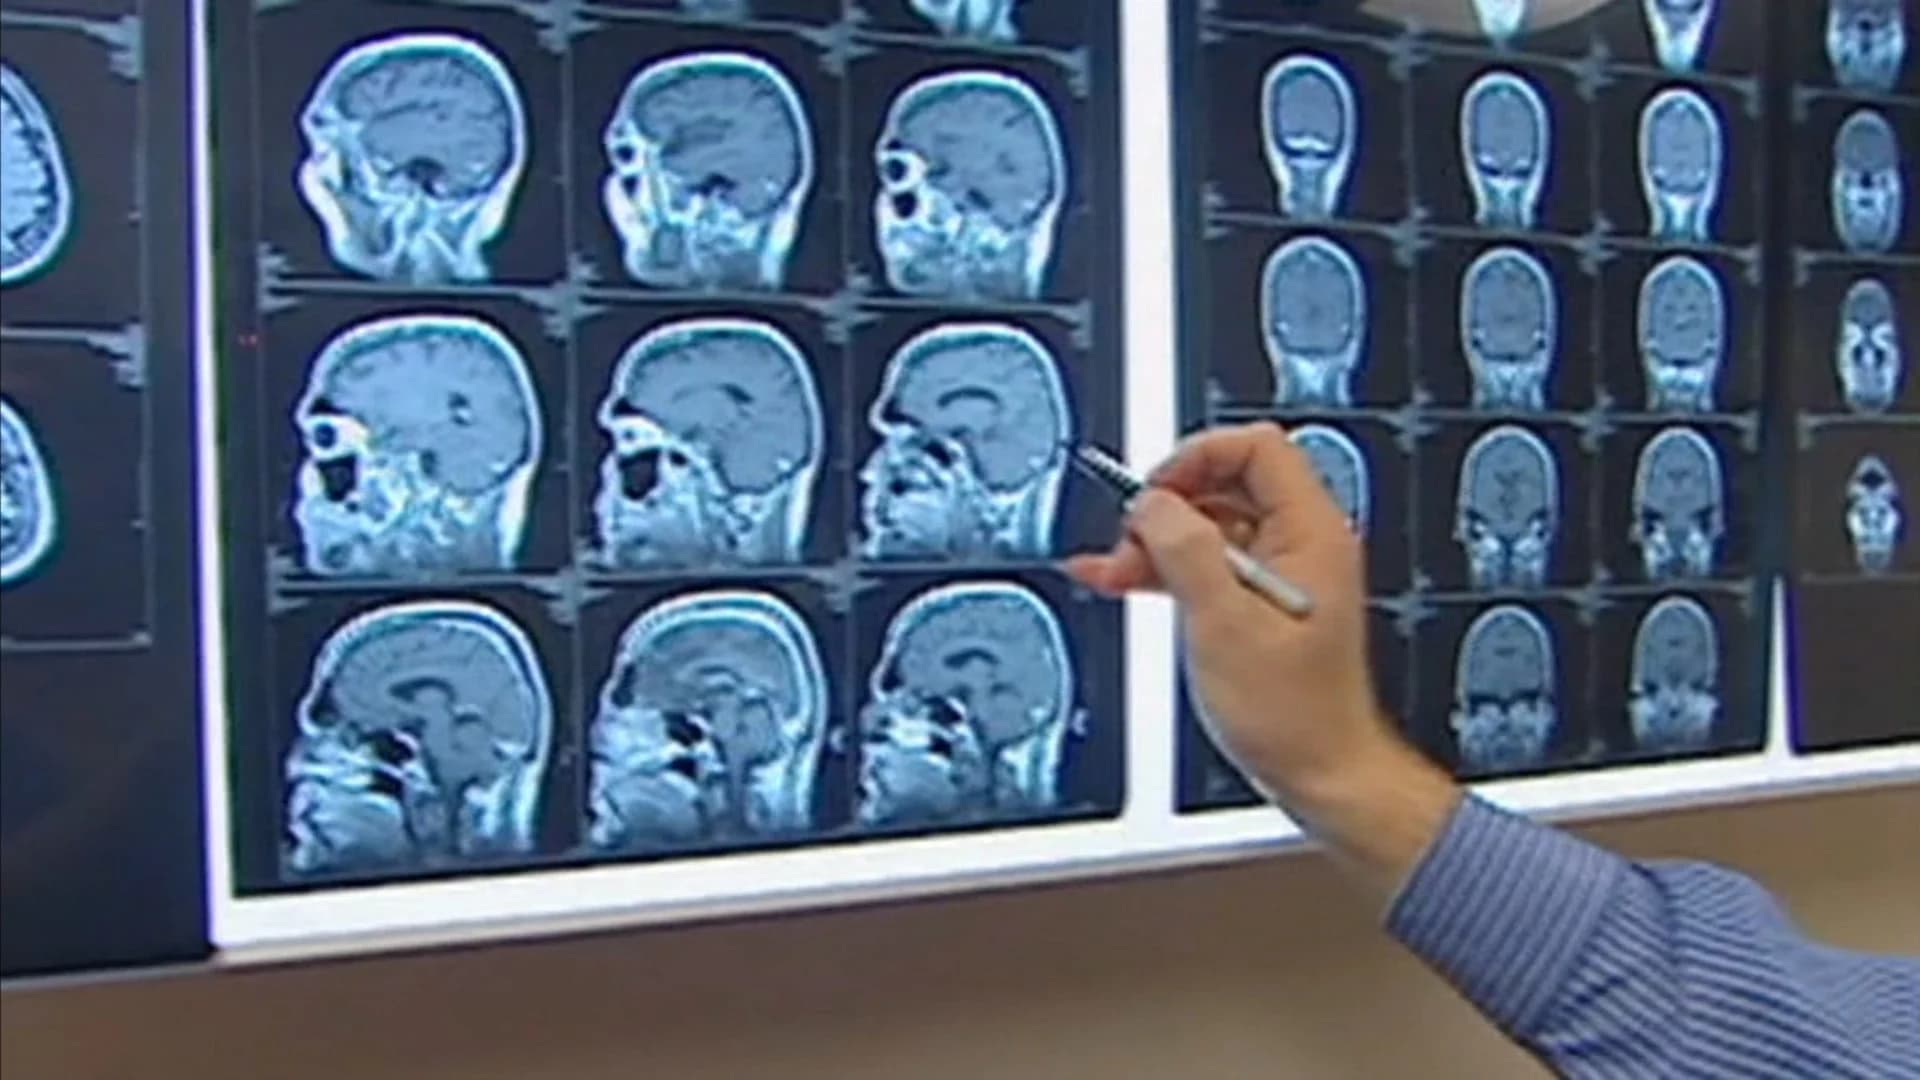 Study: Nearly 200 former football players show signs of brain disease